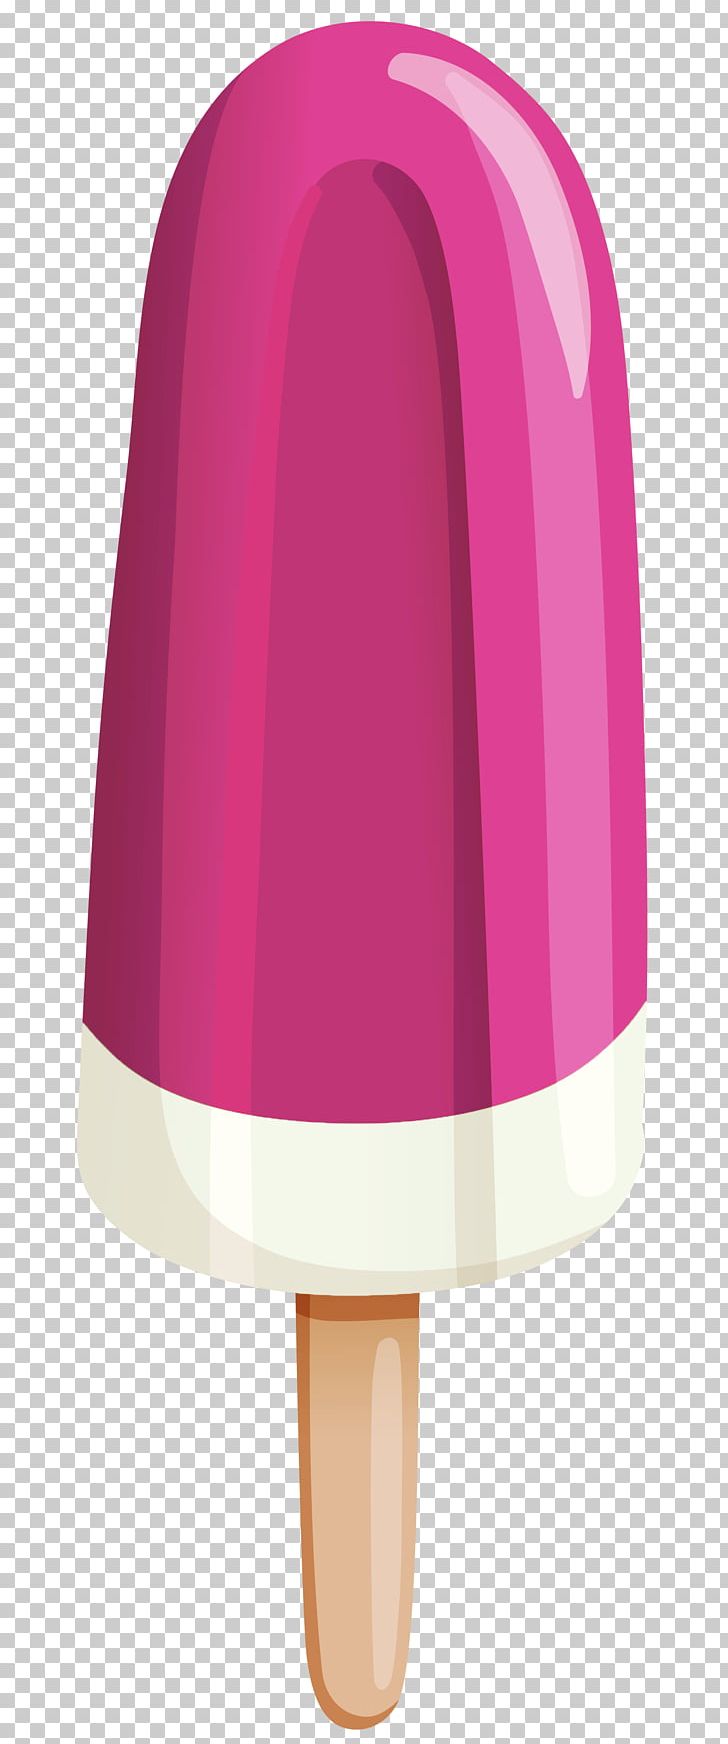 Ice Cream Cartoon PNG, Clipart, Cartoon, Clipart, Ice Cream, Magenta, Pink Free PNG Download